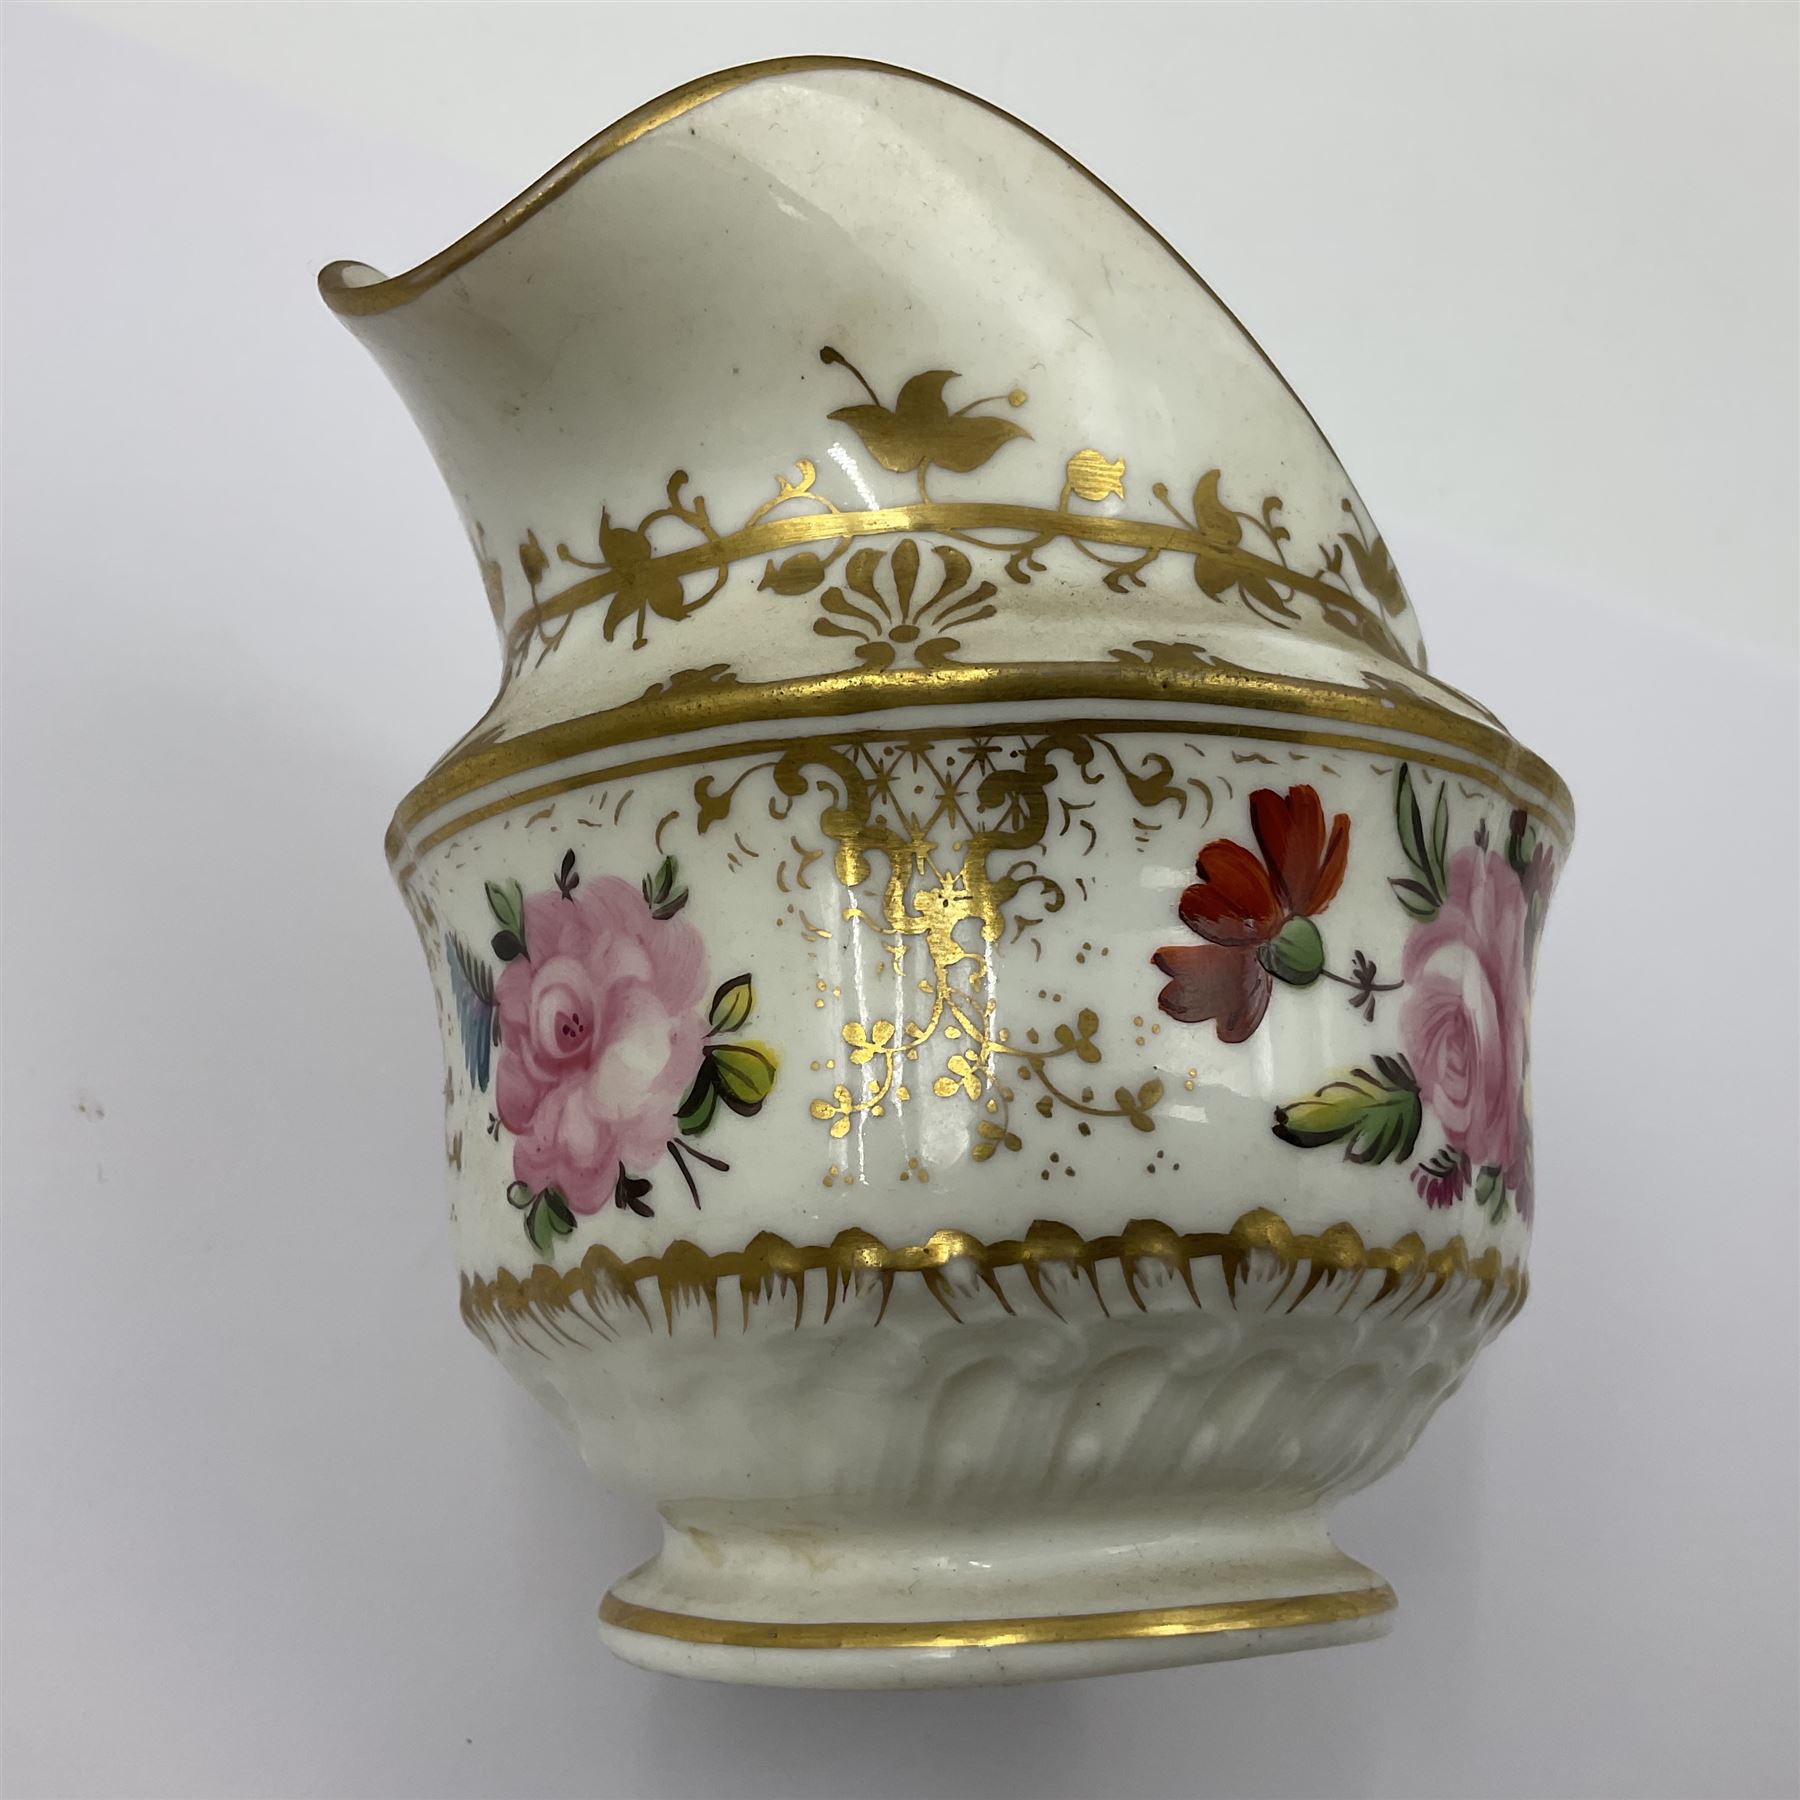 19th century Thomas Goode and Co jug - Image 9 of 22